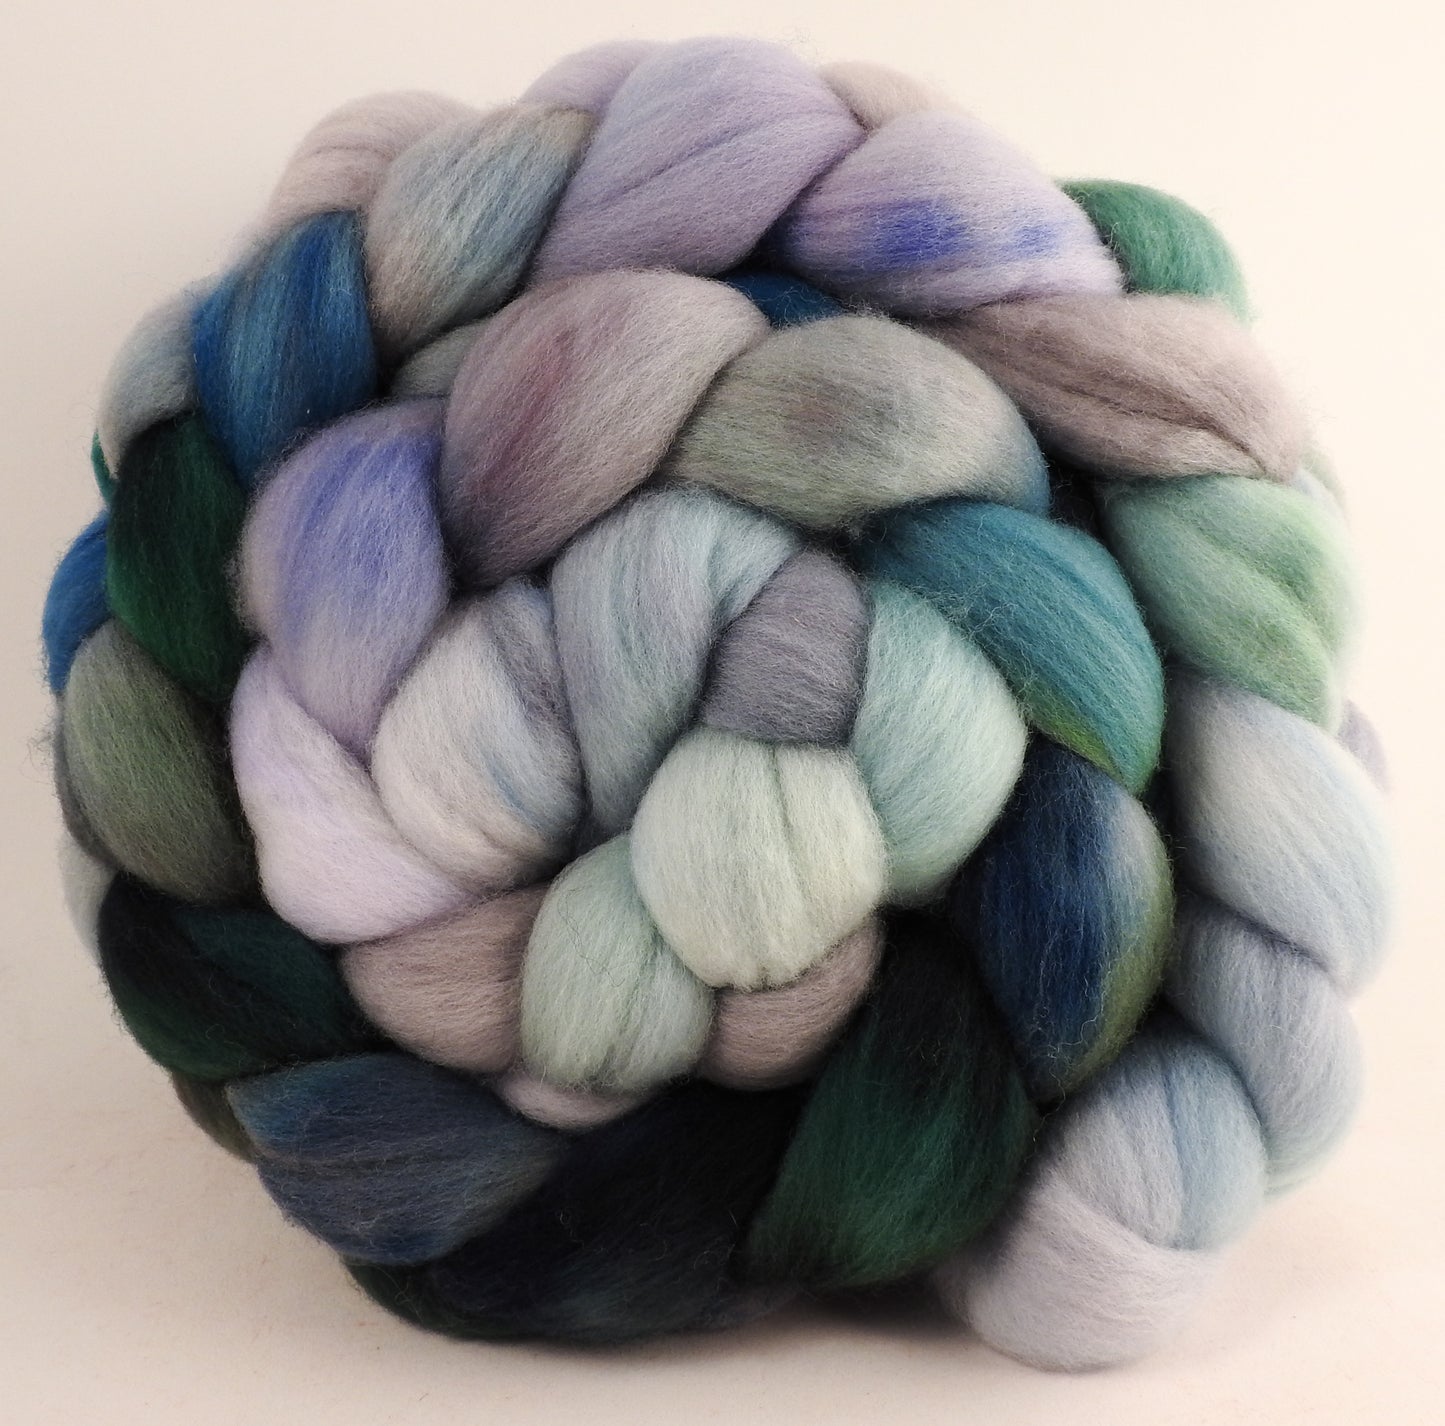 Hand dyed top for spinning - Tempest - (5.9 oz.) Organic Polwarth - Inglenook Fibers